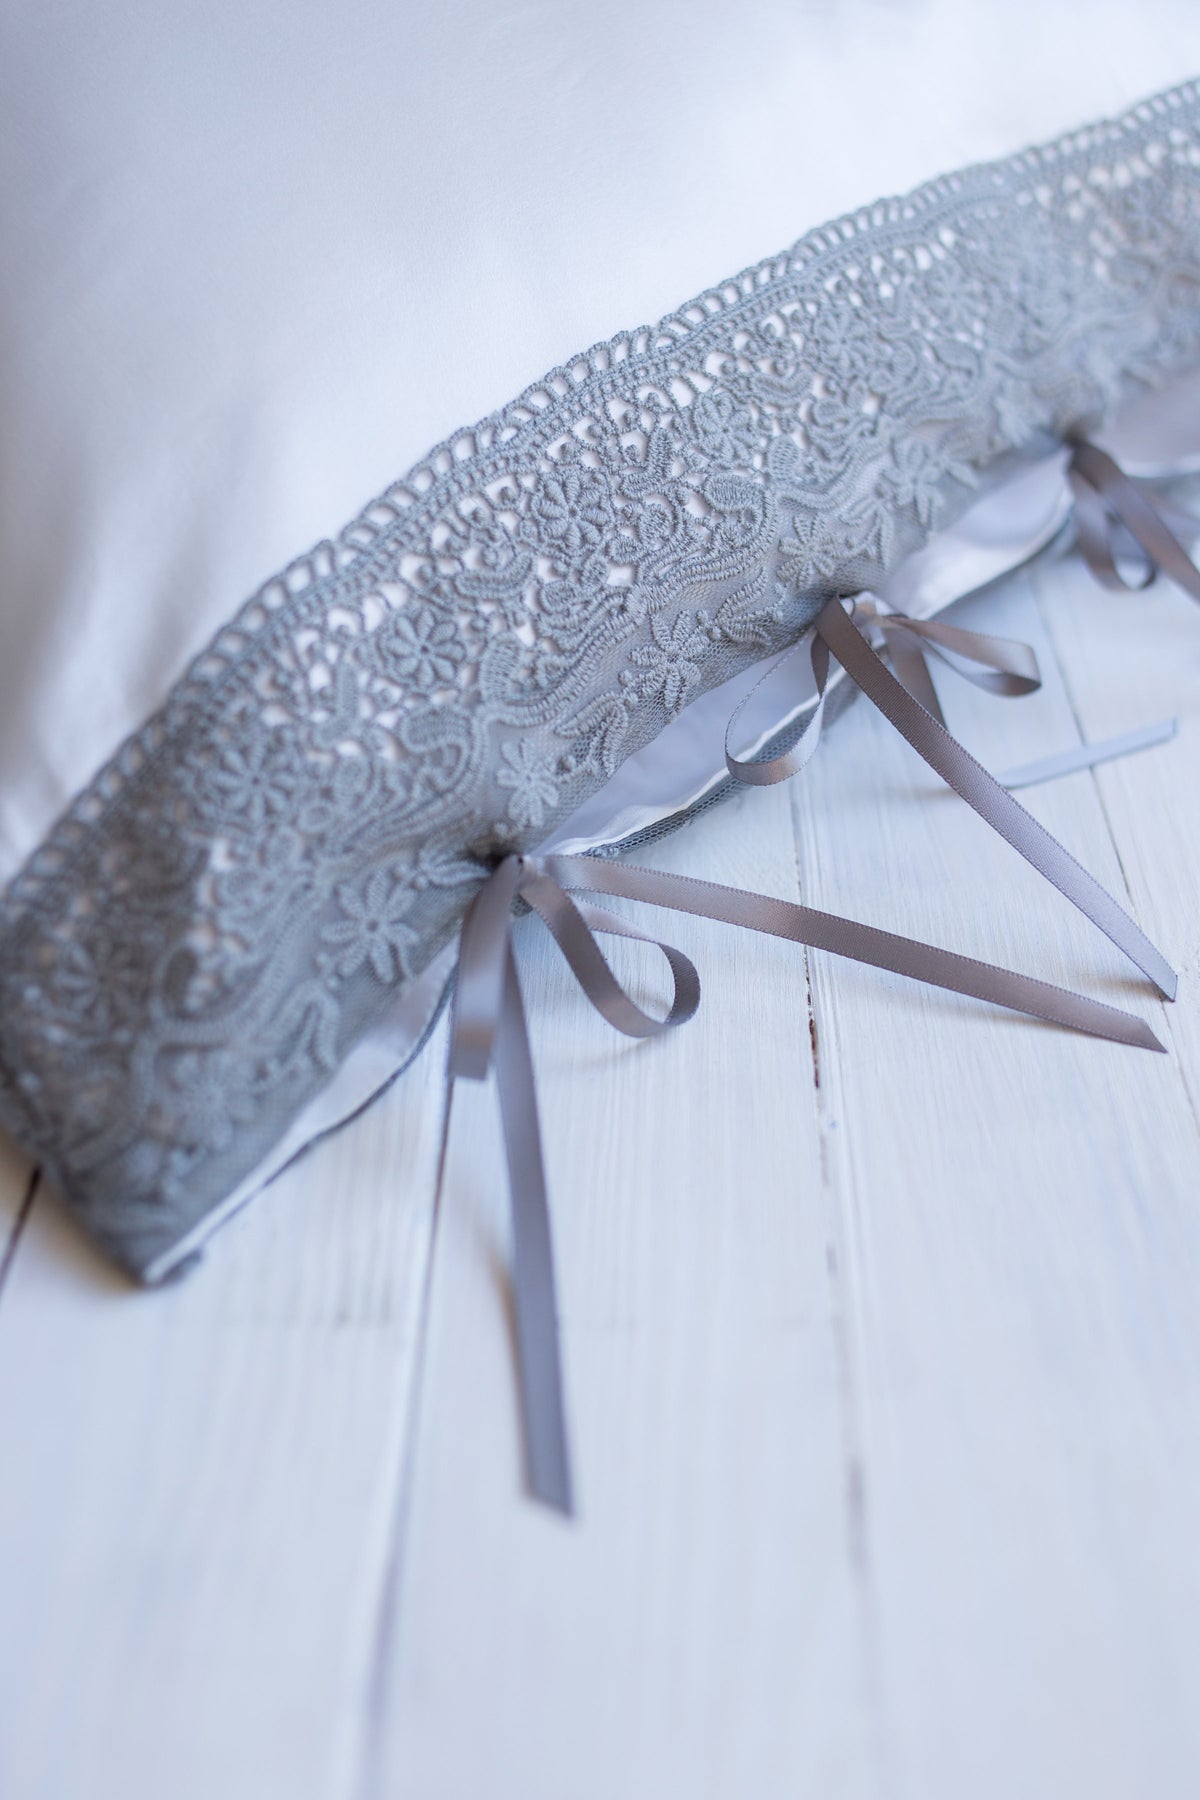 natural white silk pillowcase edged in grey lace and ribbon